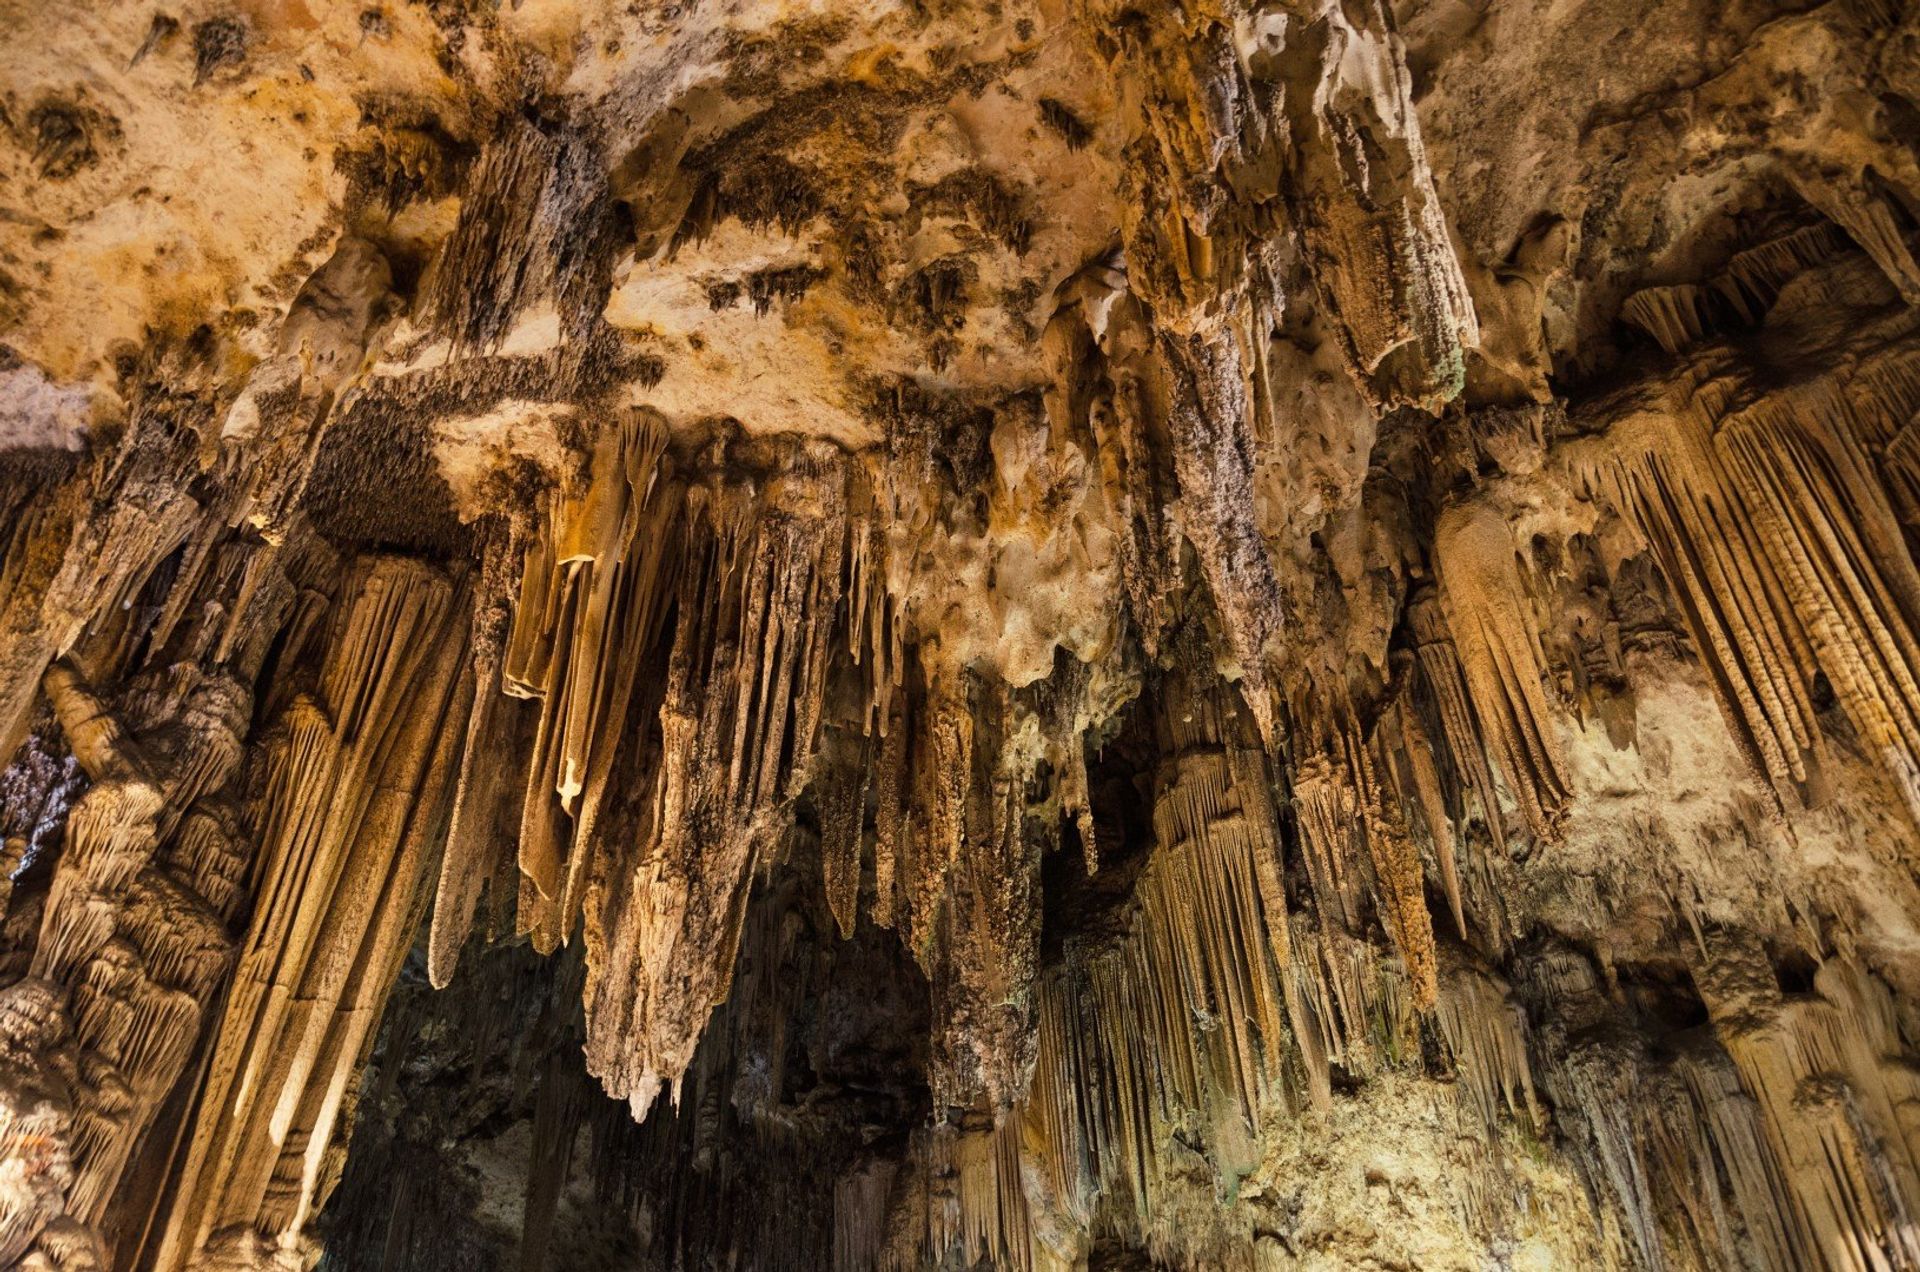 Stalactites and stalagmites in the famous Nerja Caves, a 5-minute drive from Nerja's centre